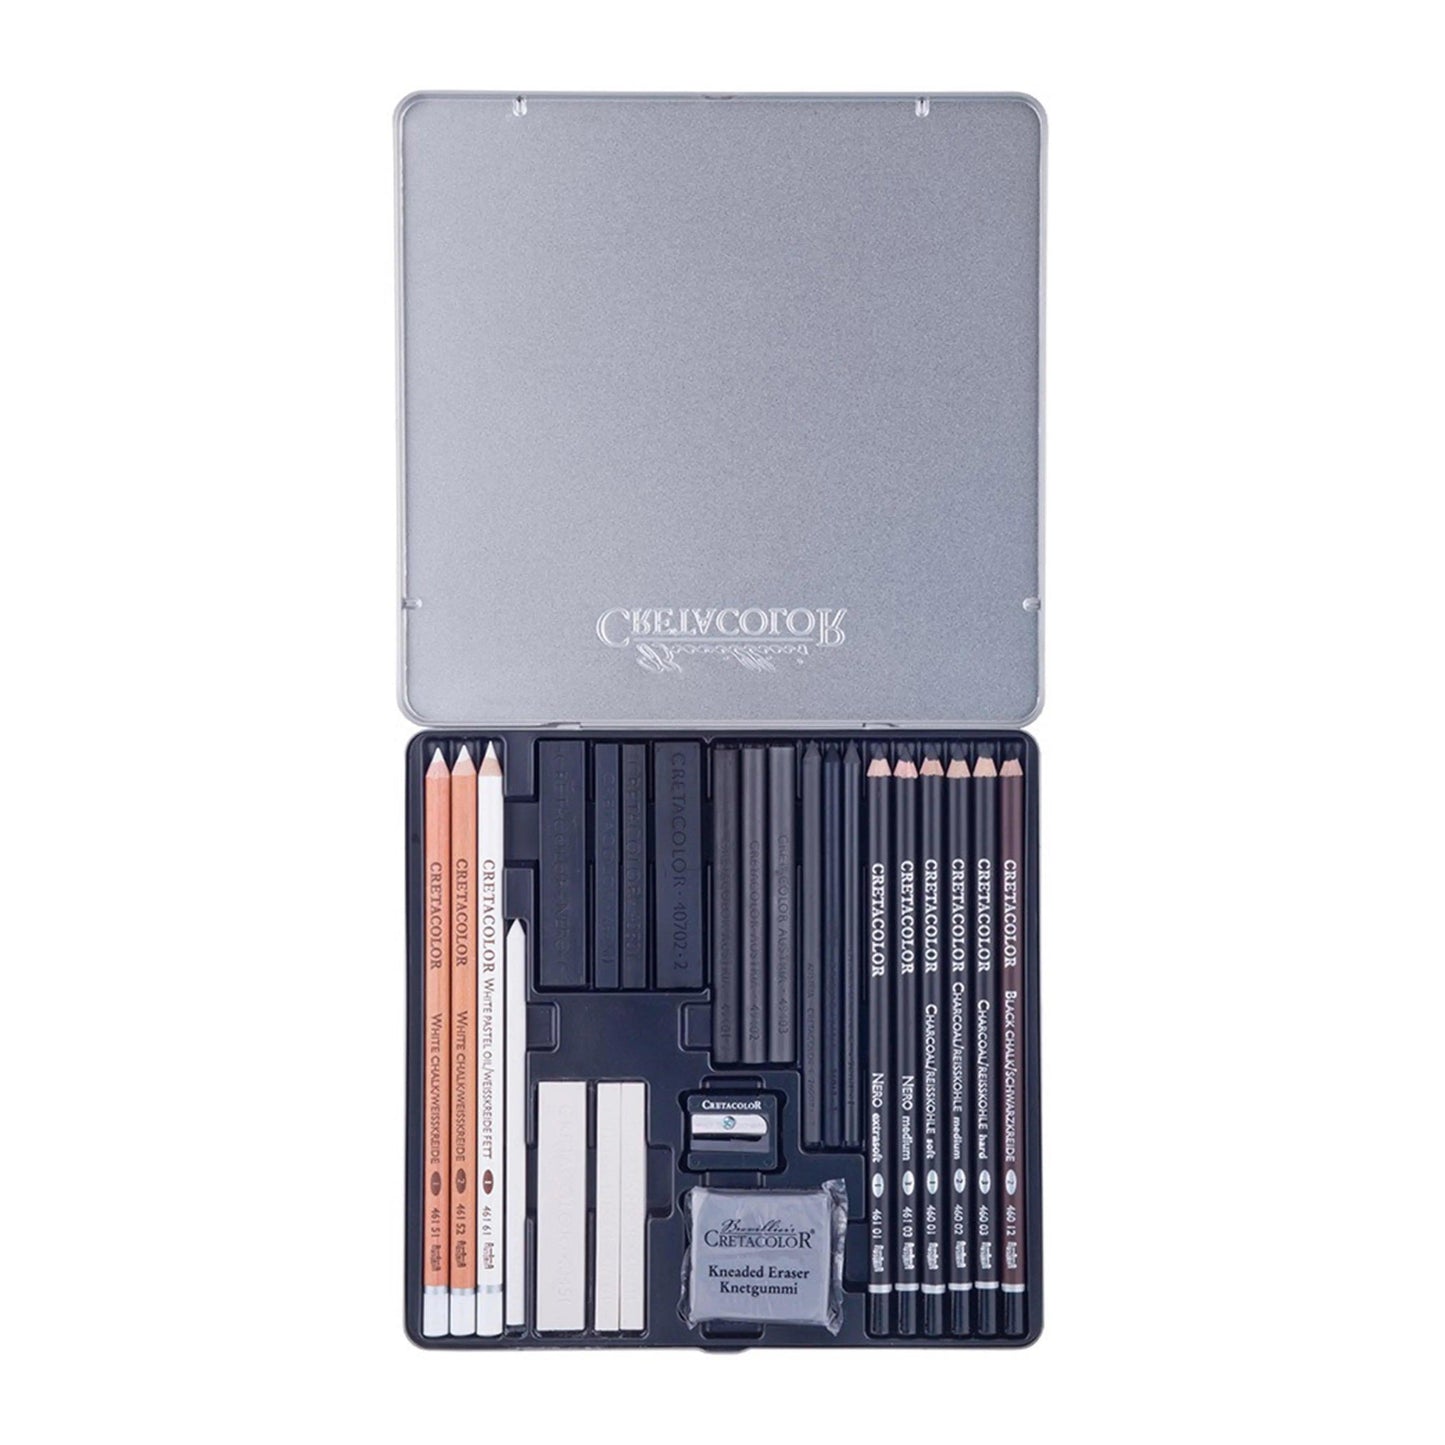 Cretacolor Black &amp; White Charcoal Set of 25 Pcs In Tin Box The Stationers